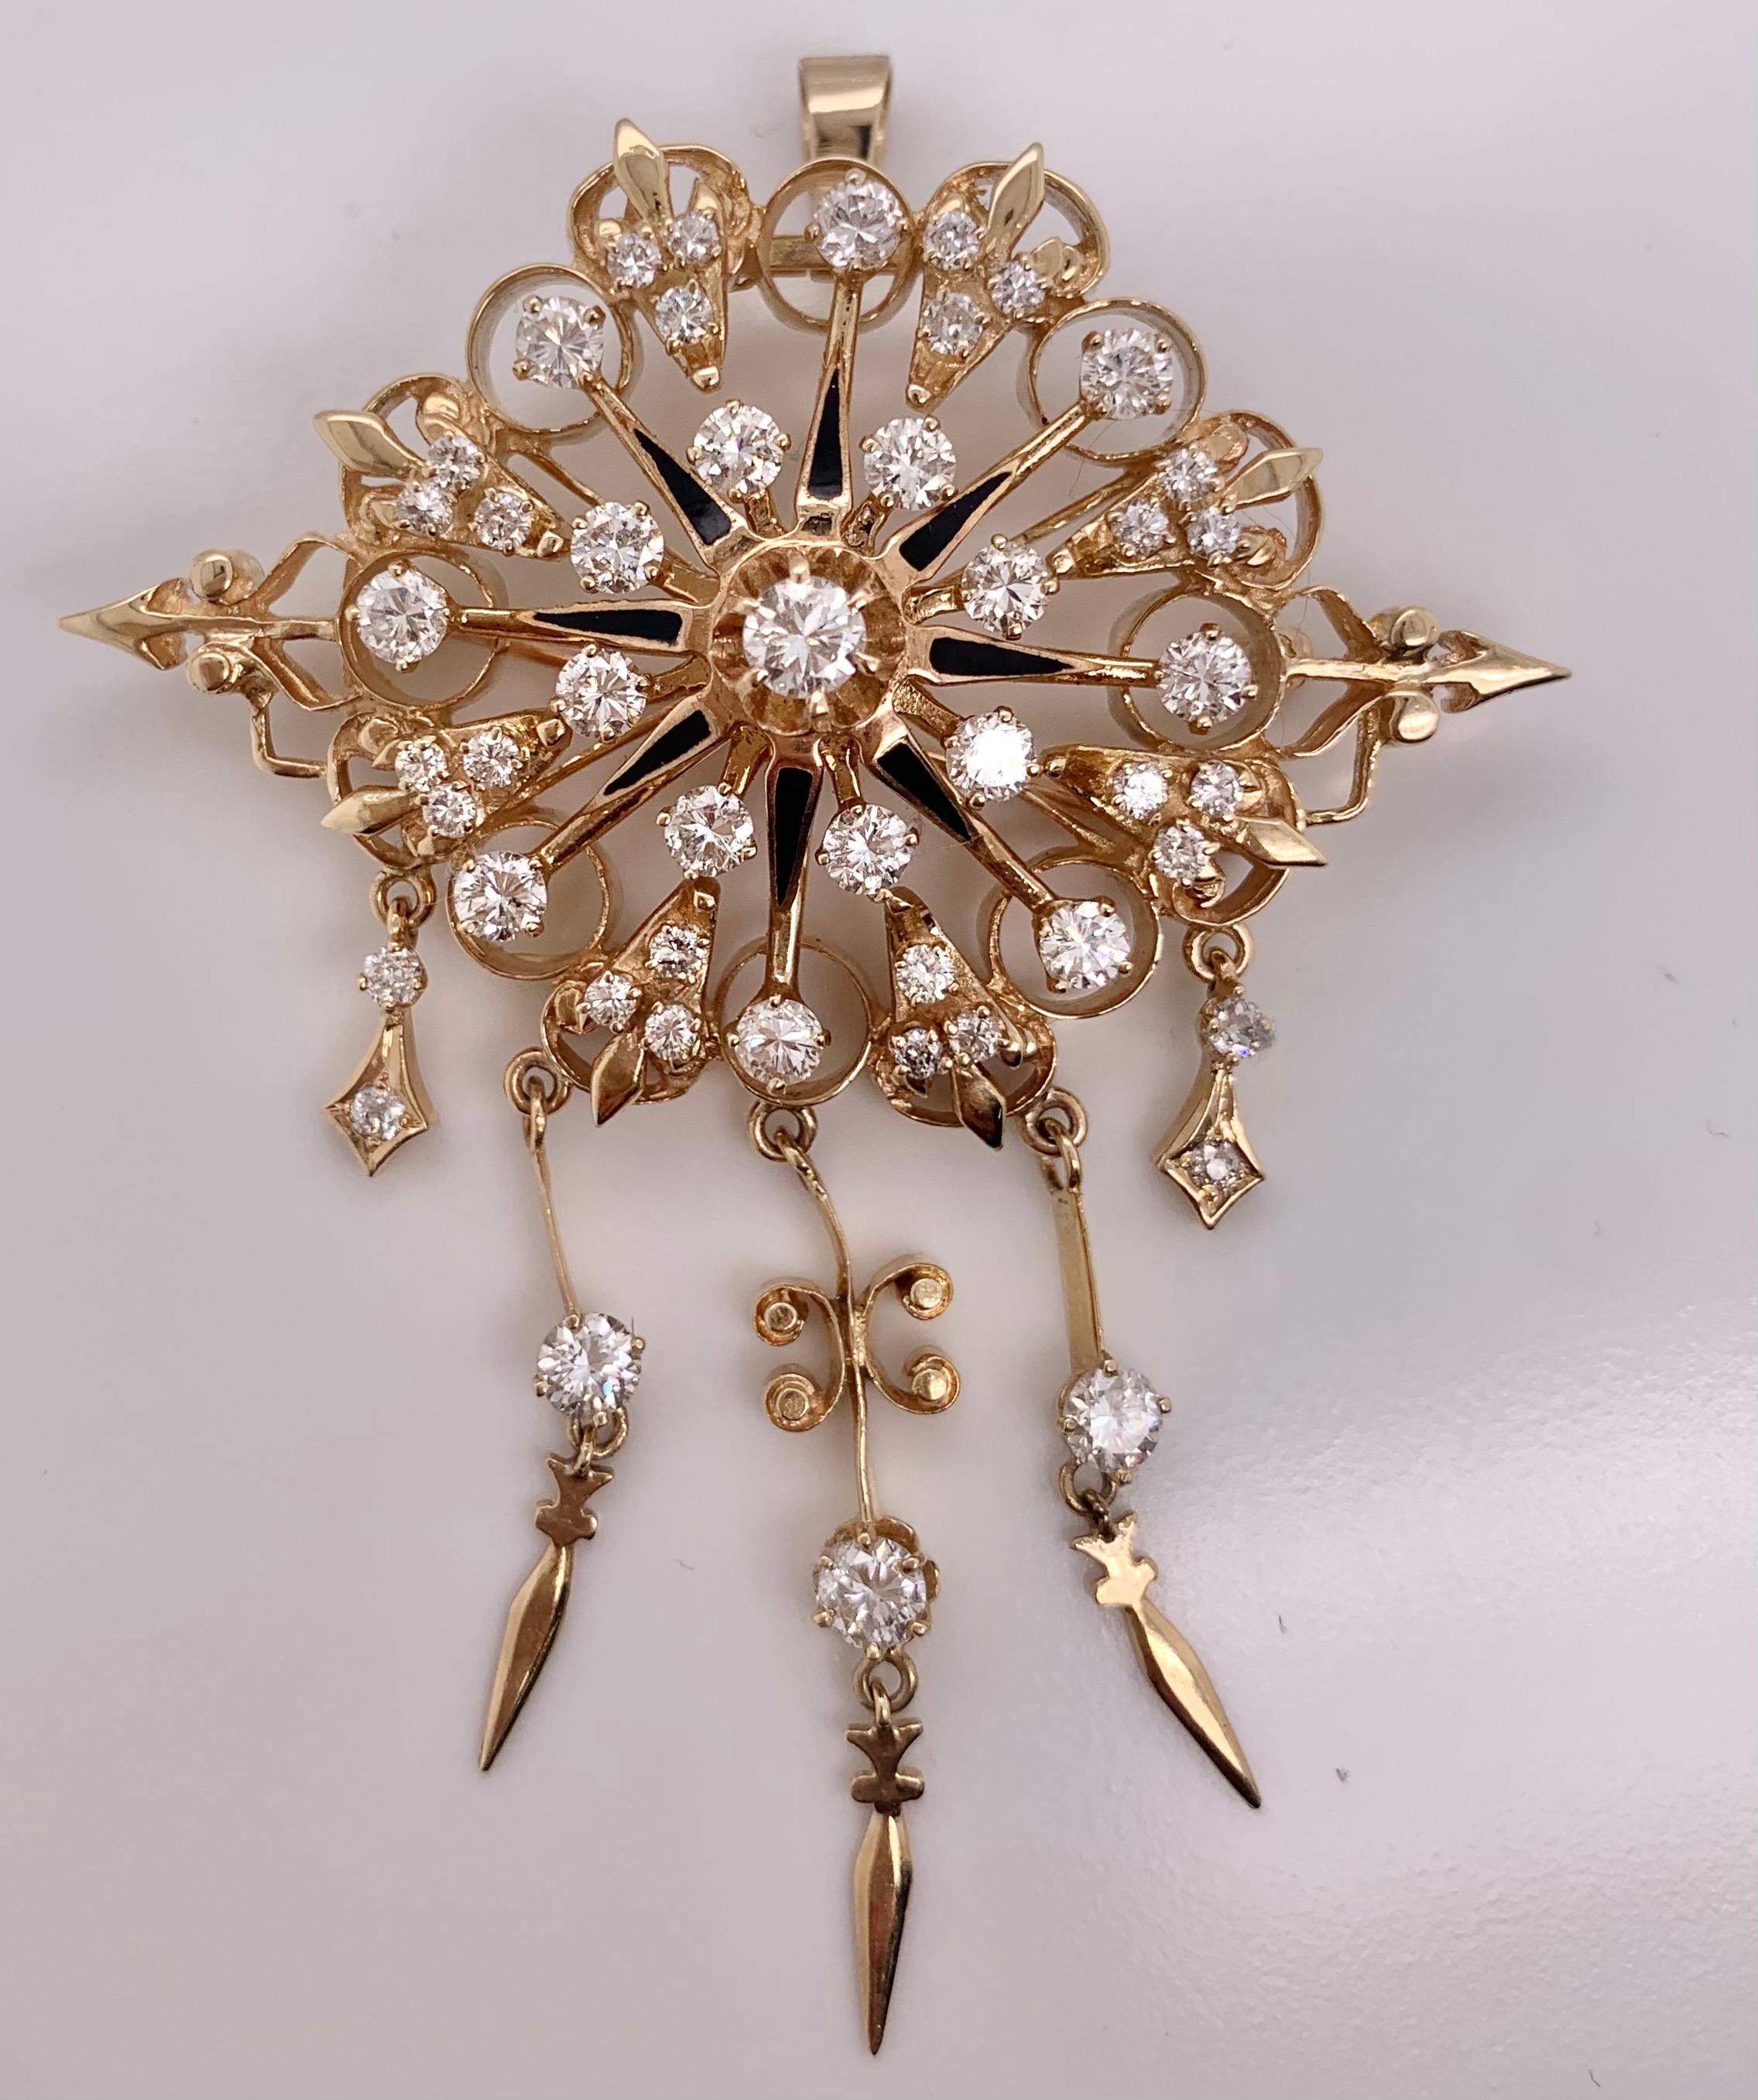 Celestial Diamond and Enamel Brooch and Pendant In Good Condition For Sale In New York, NY